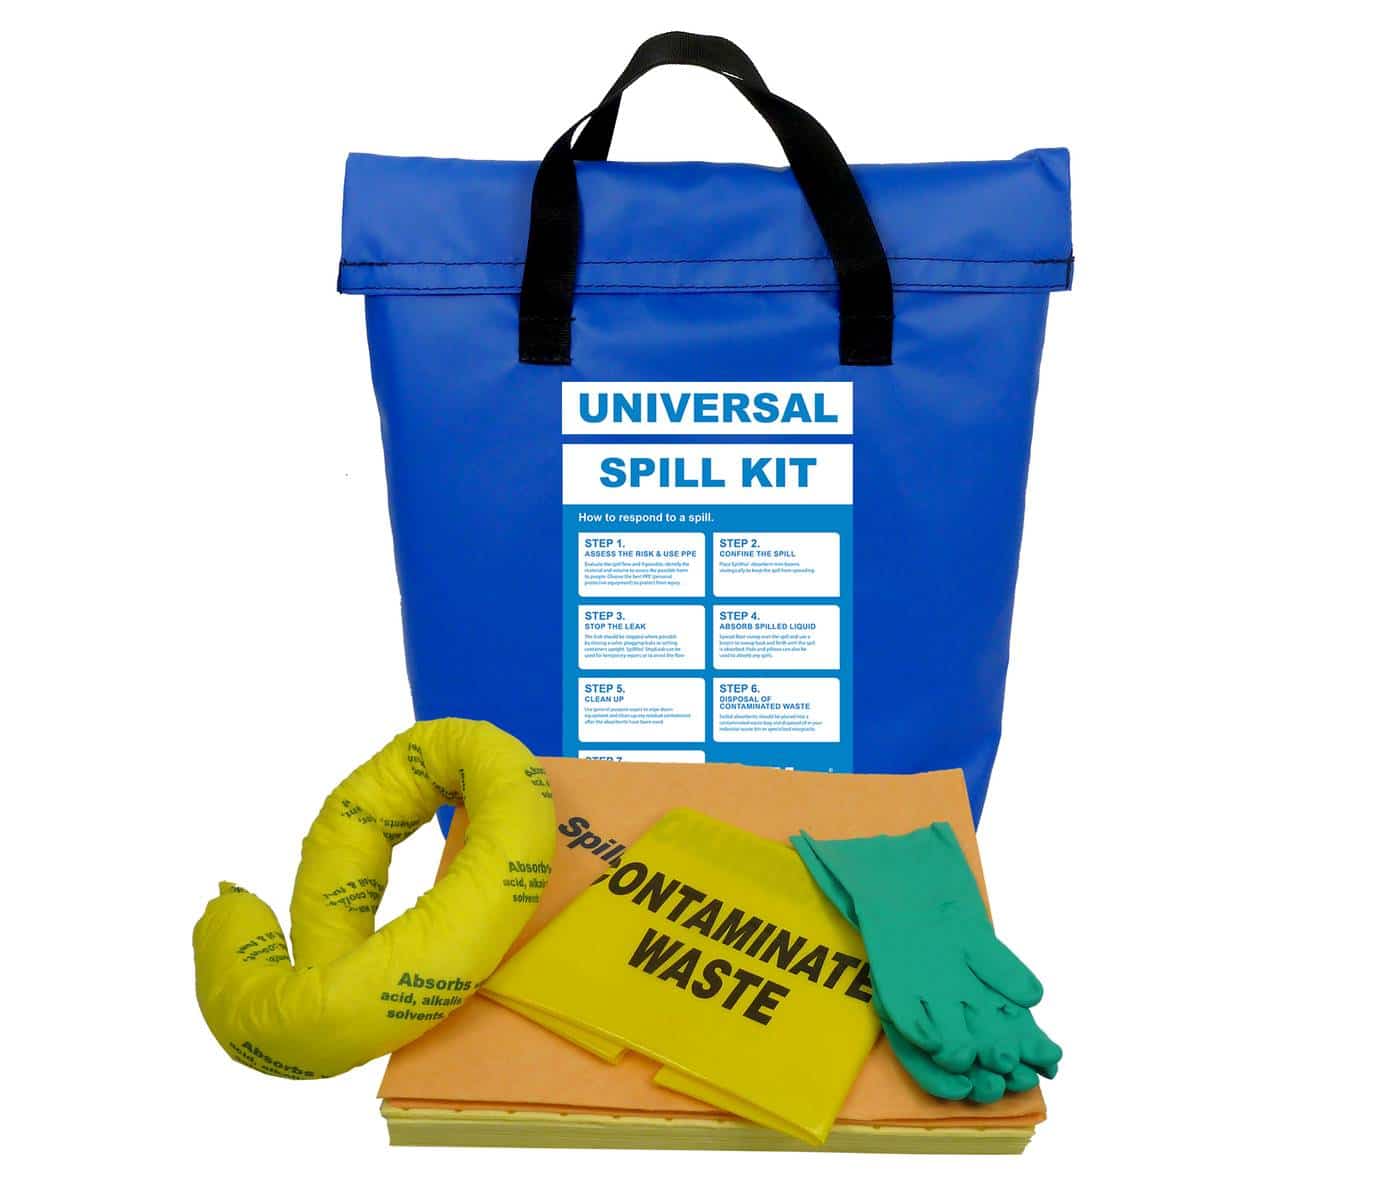 SpilMax 25L Universal Vehicle Spill Kit Bag with contents showing